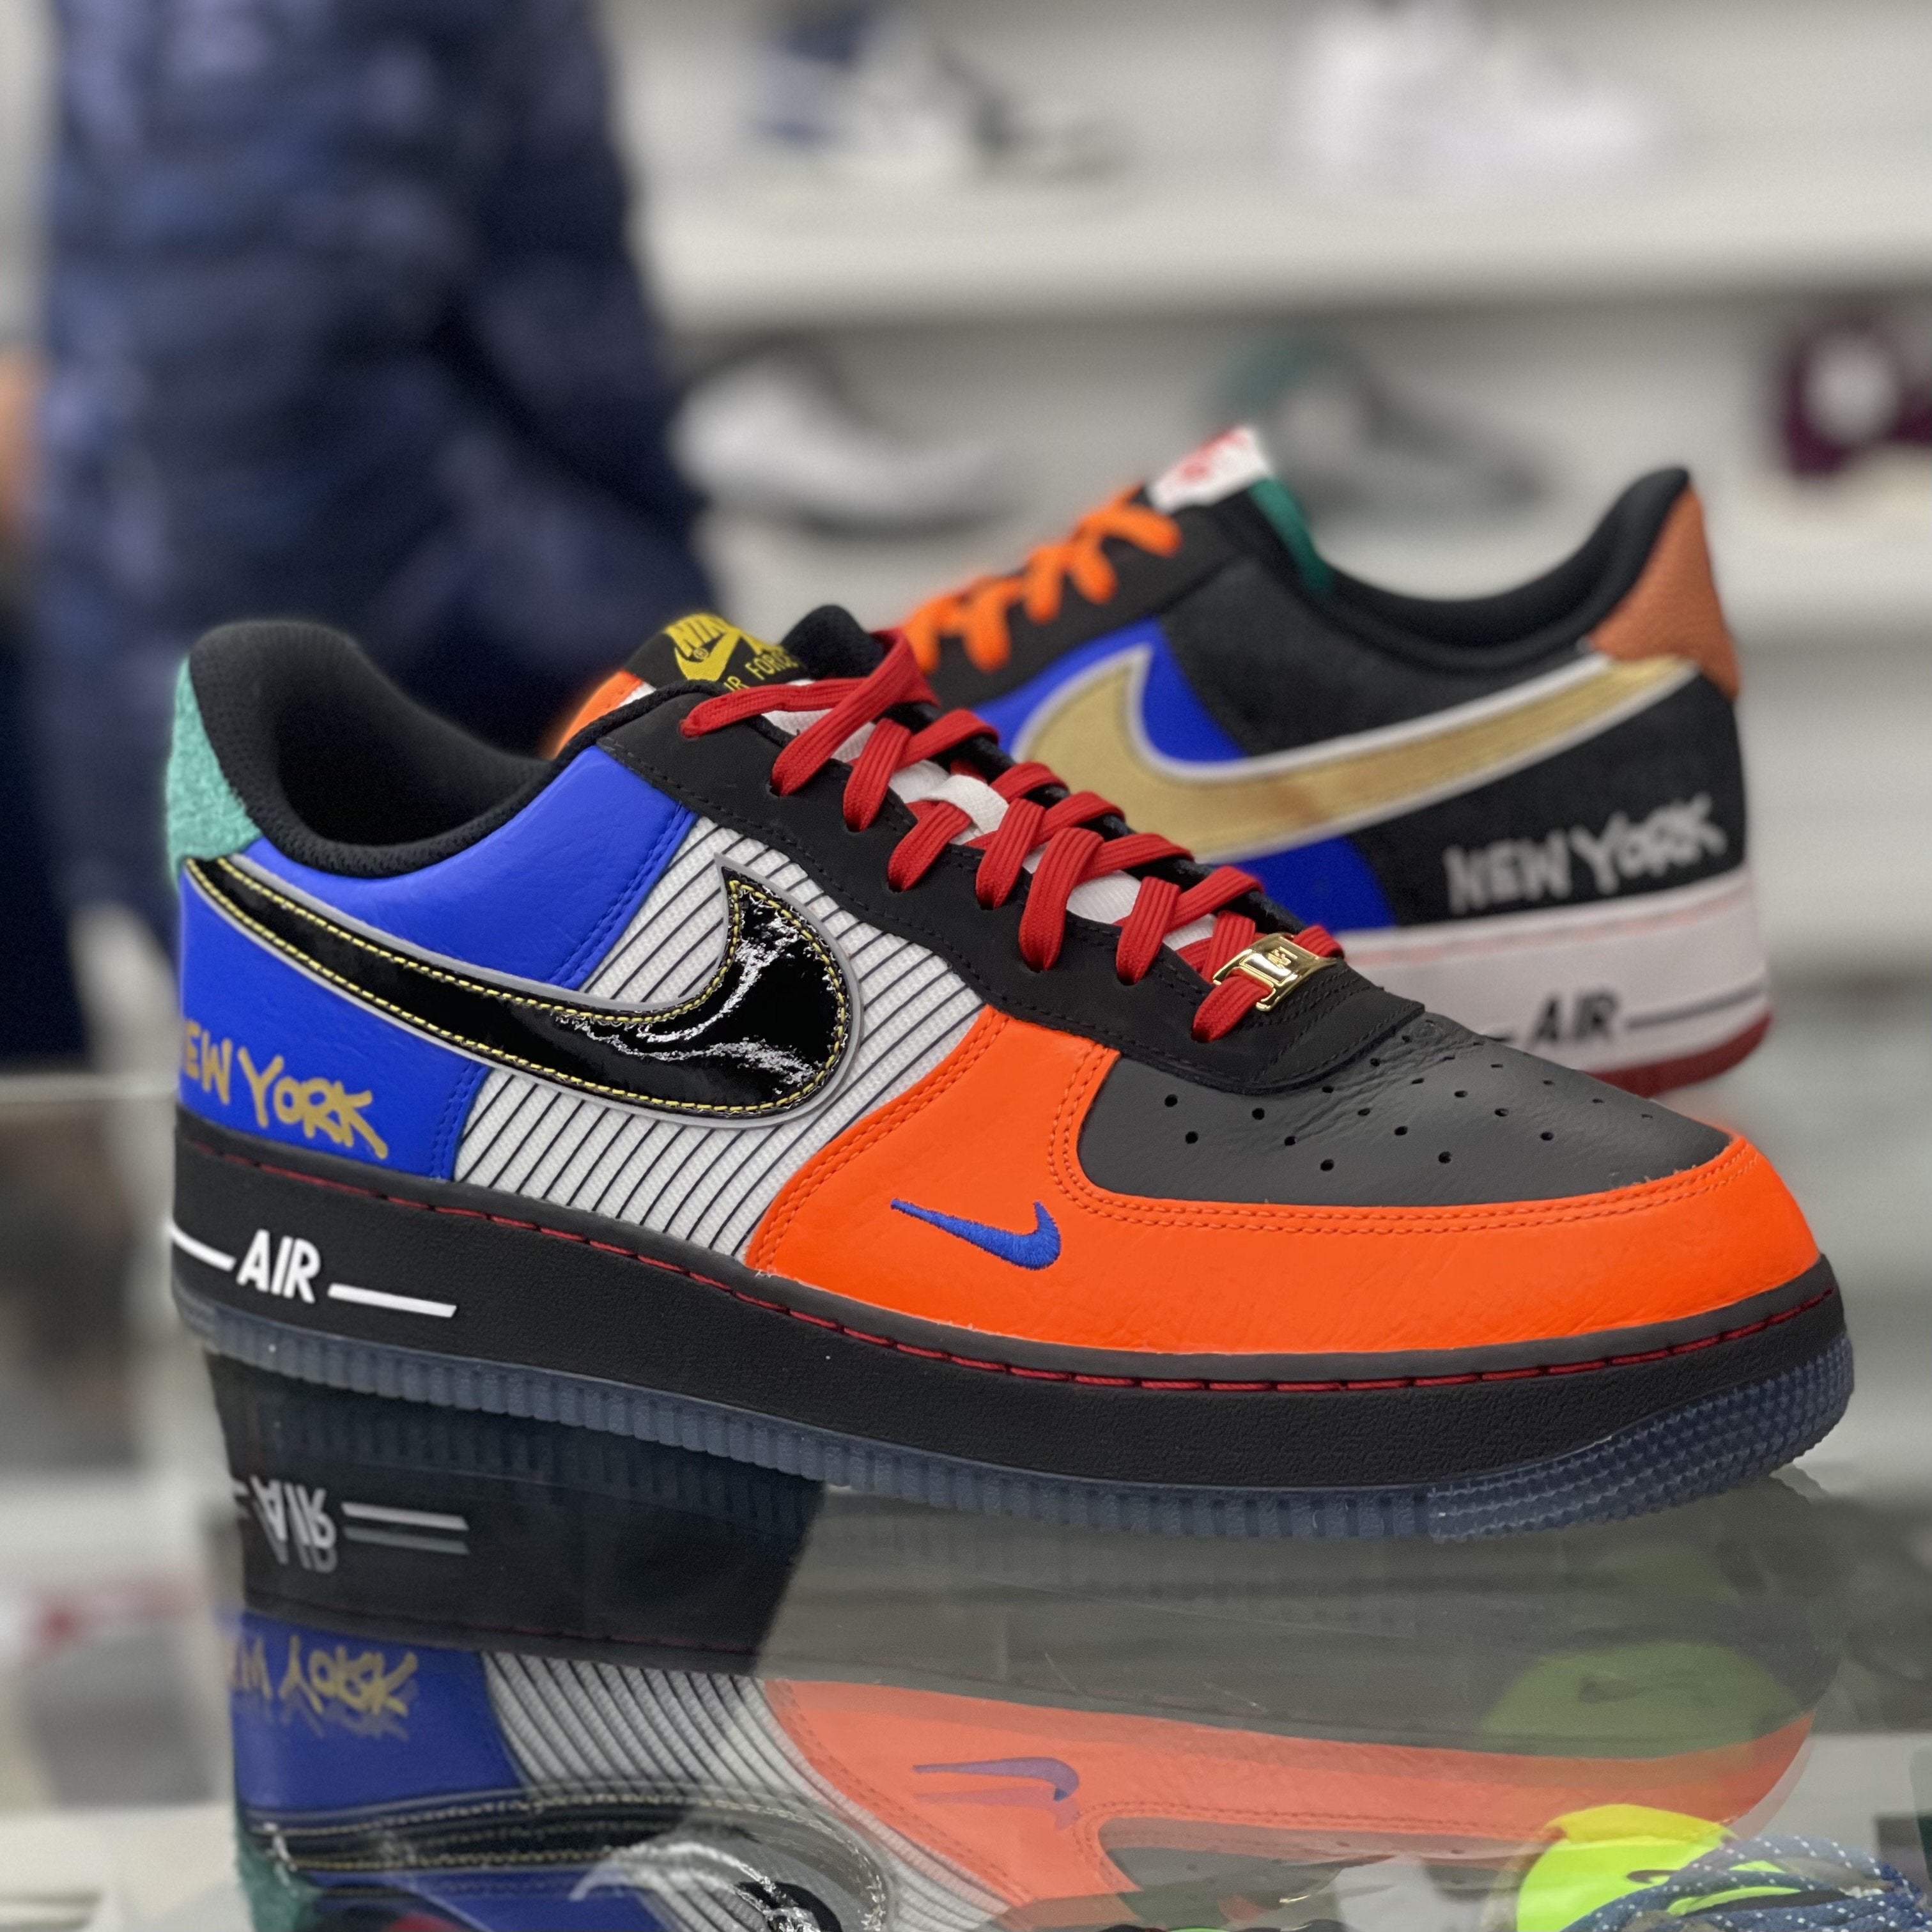 Nike Air Force 1 Low “NYC city of athletes”